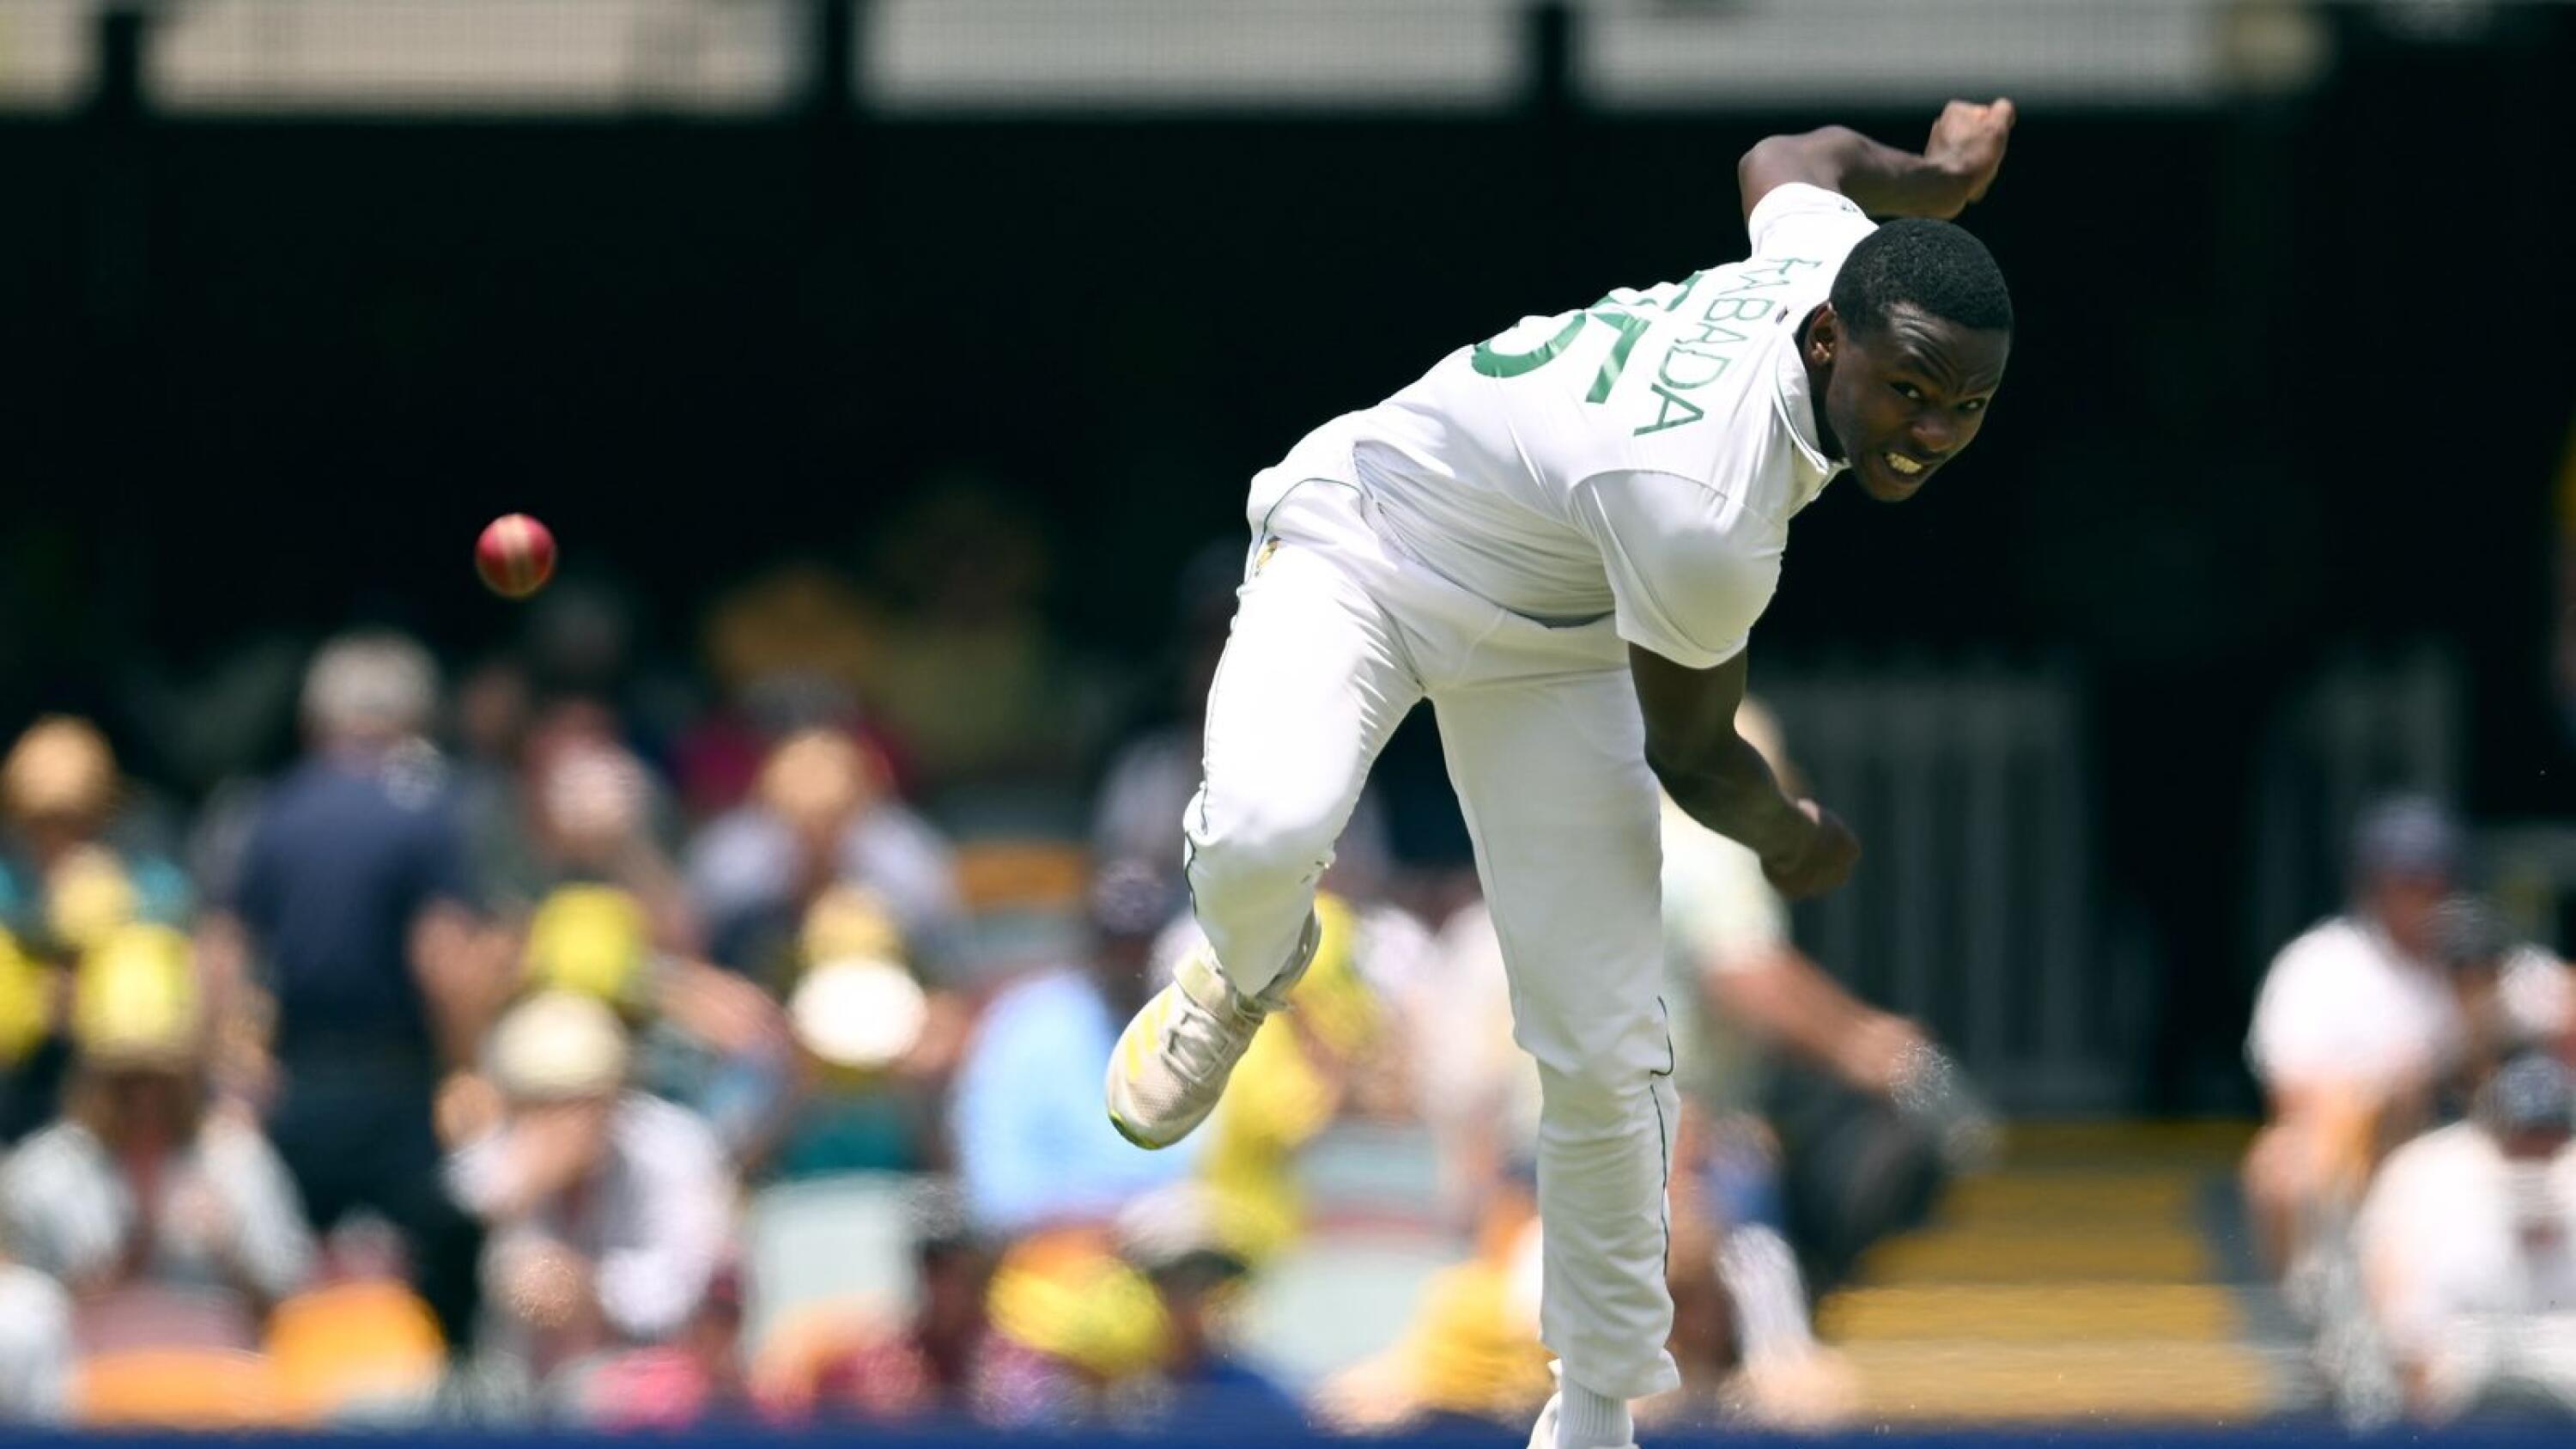 South Africa bowler Kagiso Rabada in action on day two of the First Test against Australia at the Gabba in Brisbane